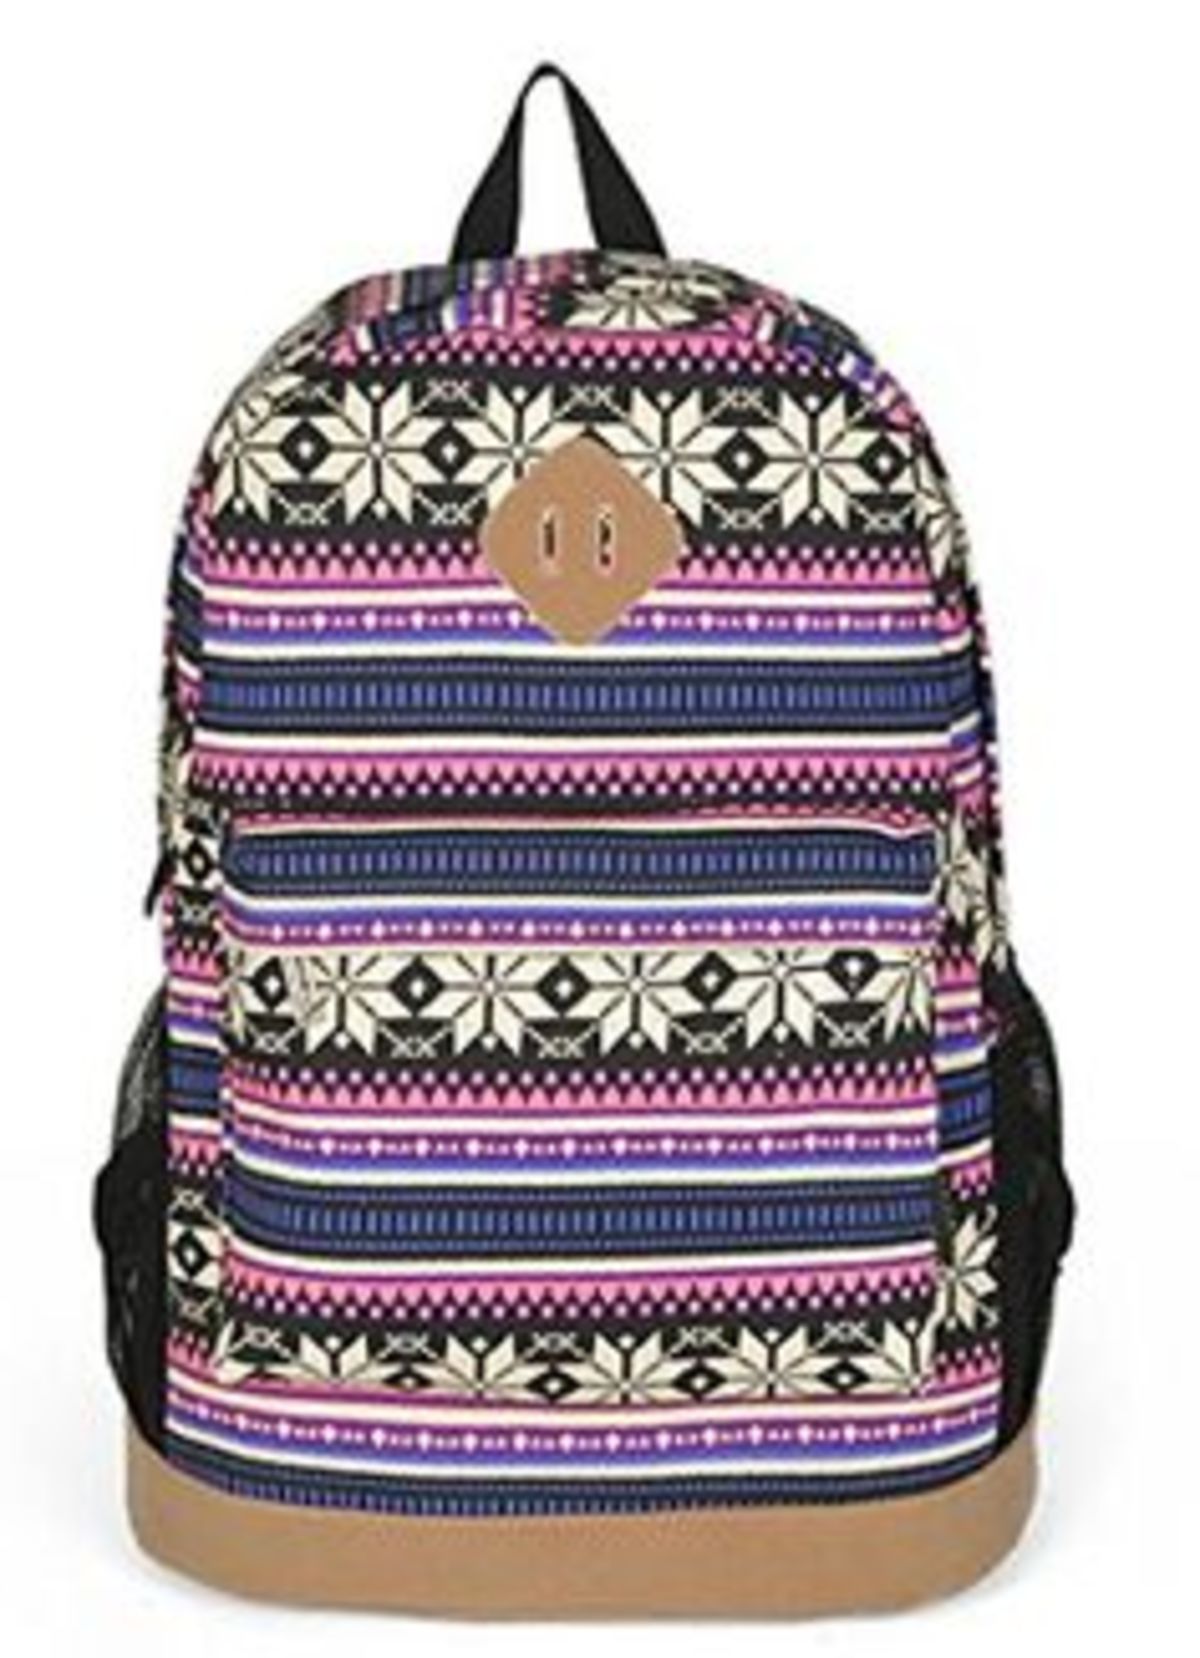 Best Luxury Backpacks For College Graduates | IQS Executive